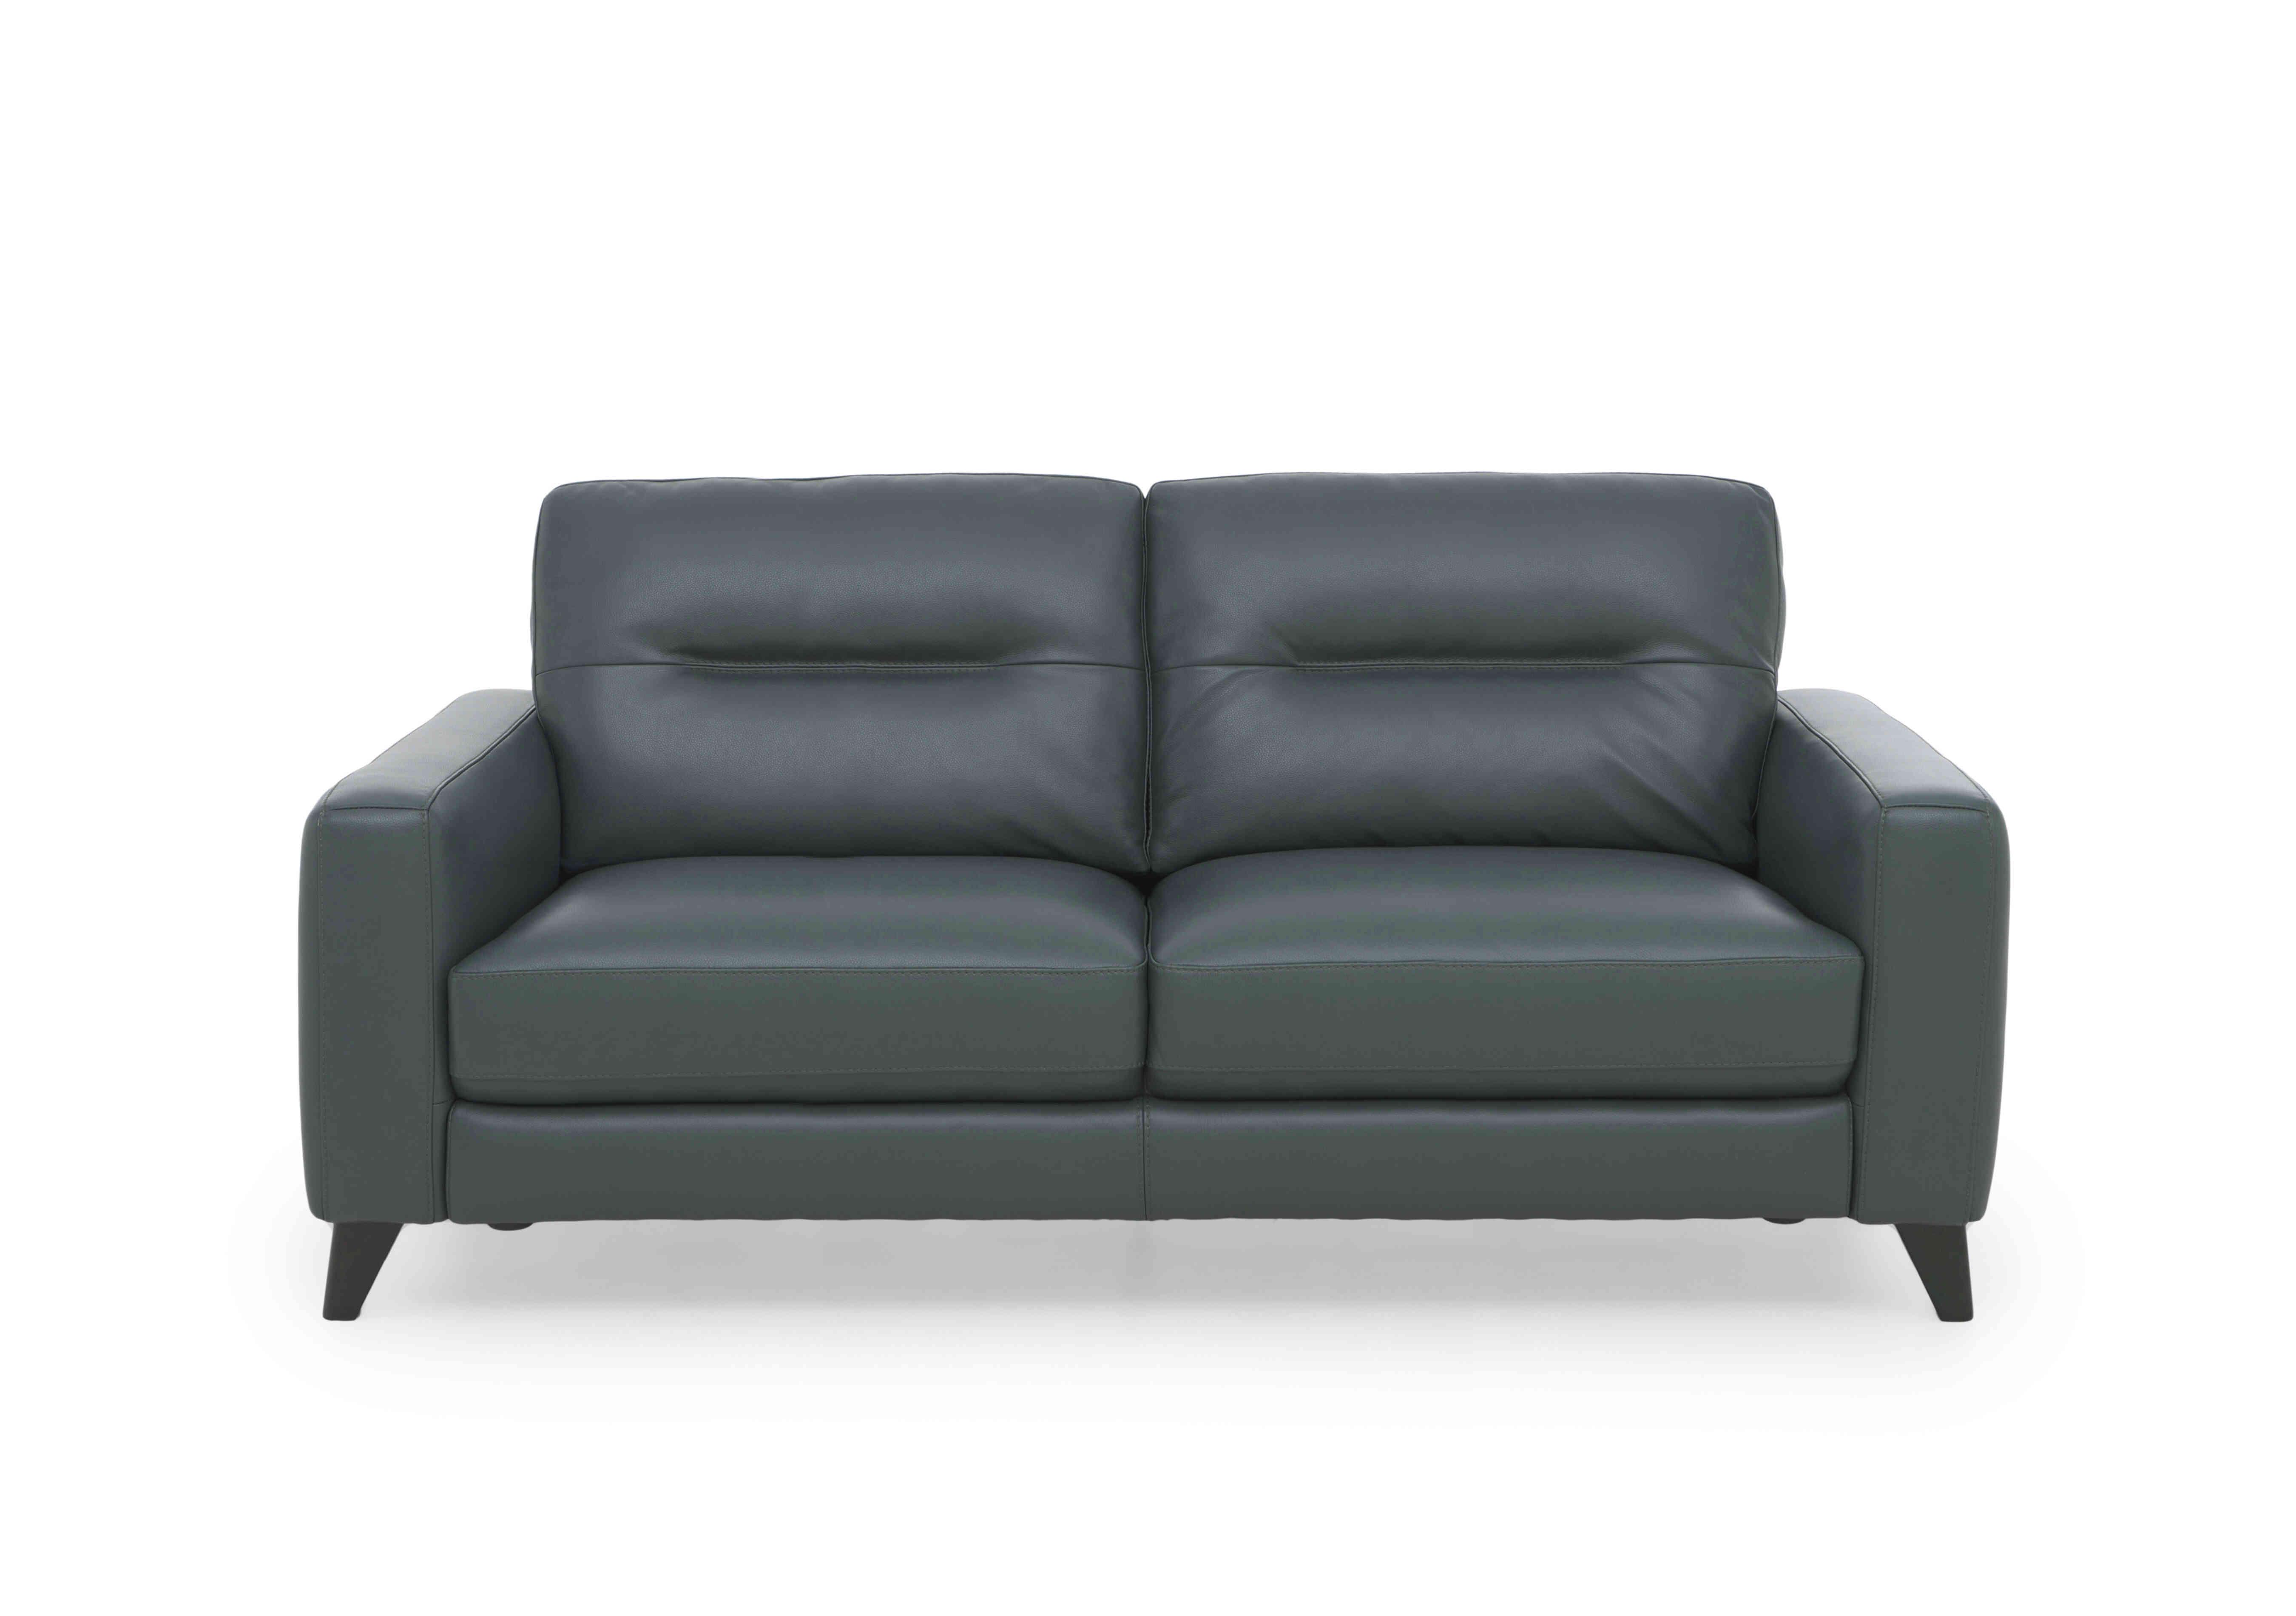 Jules 3 Seater Leather Sofa in Bv-301e Lake Green on Furniture Village